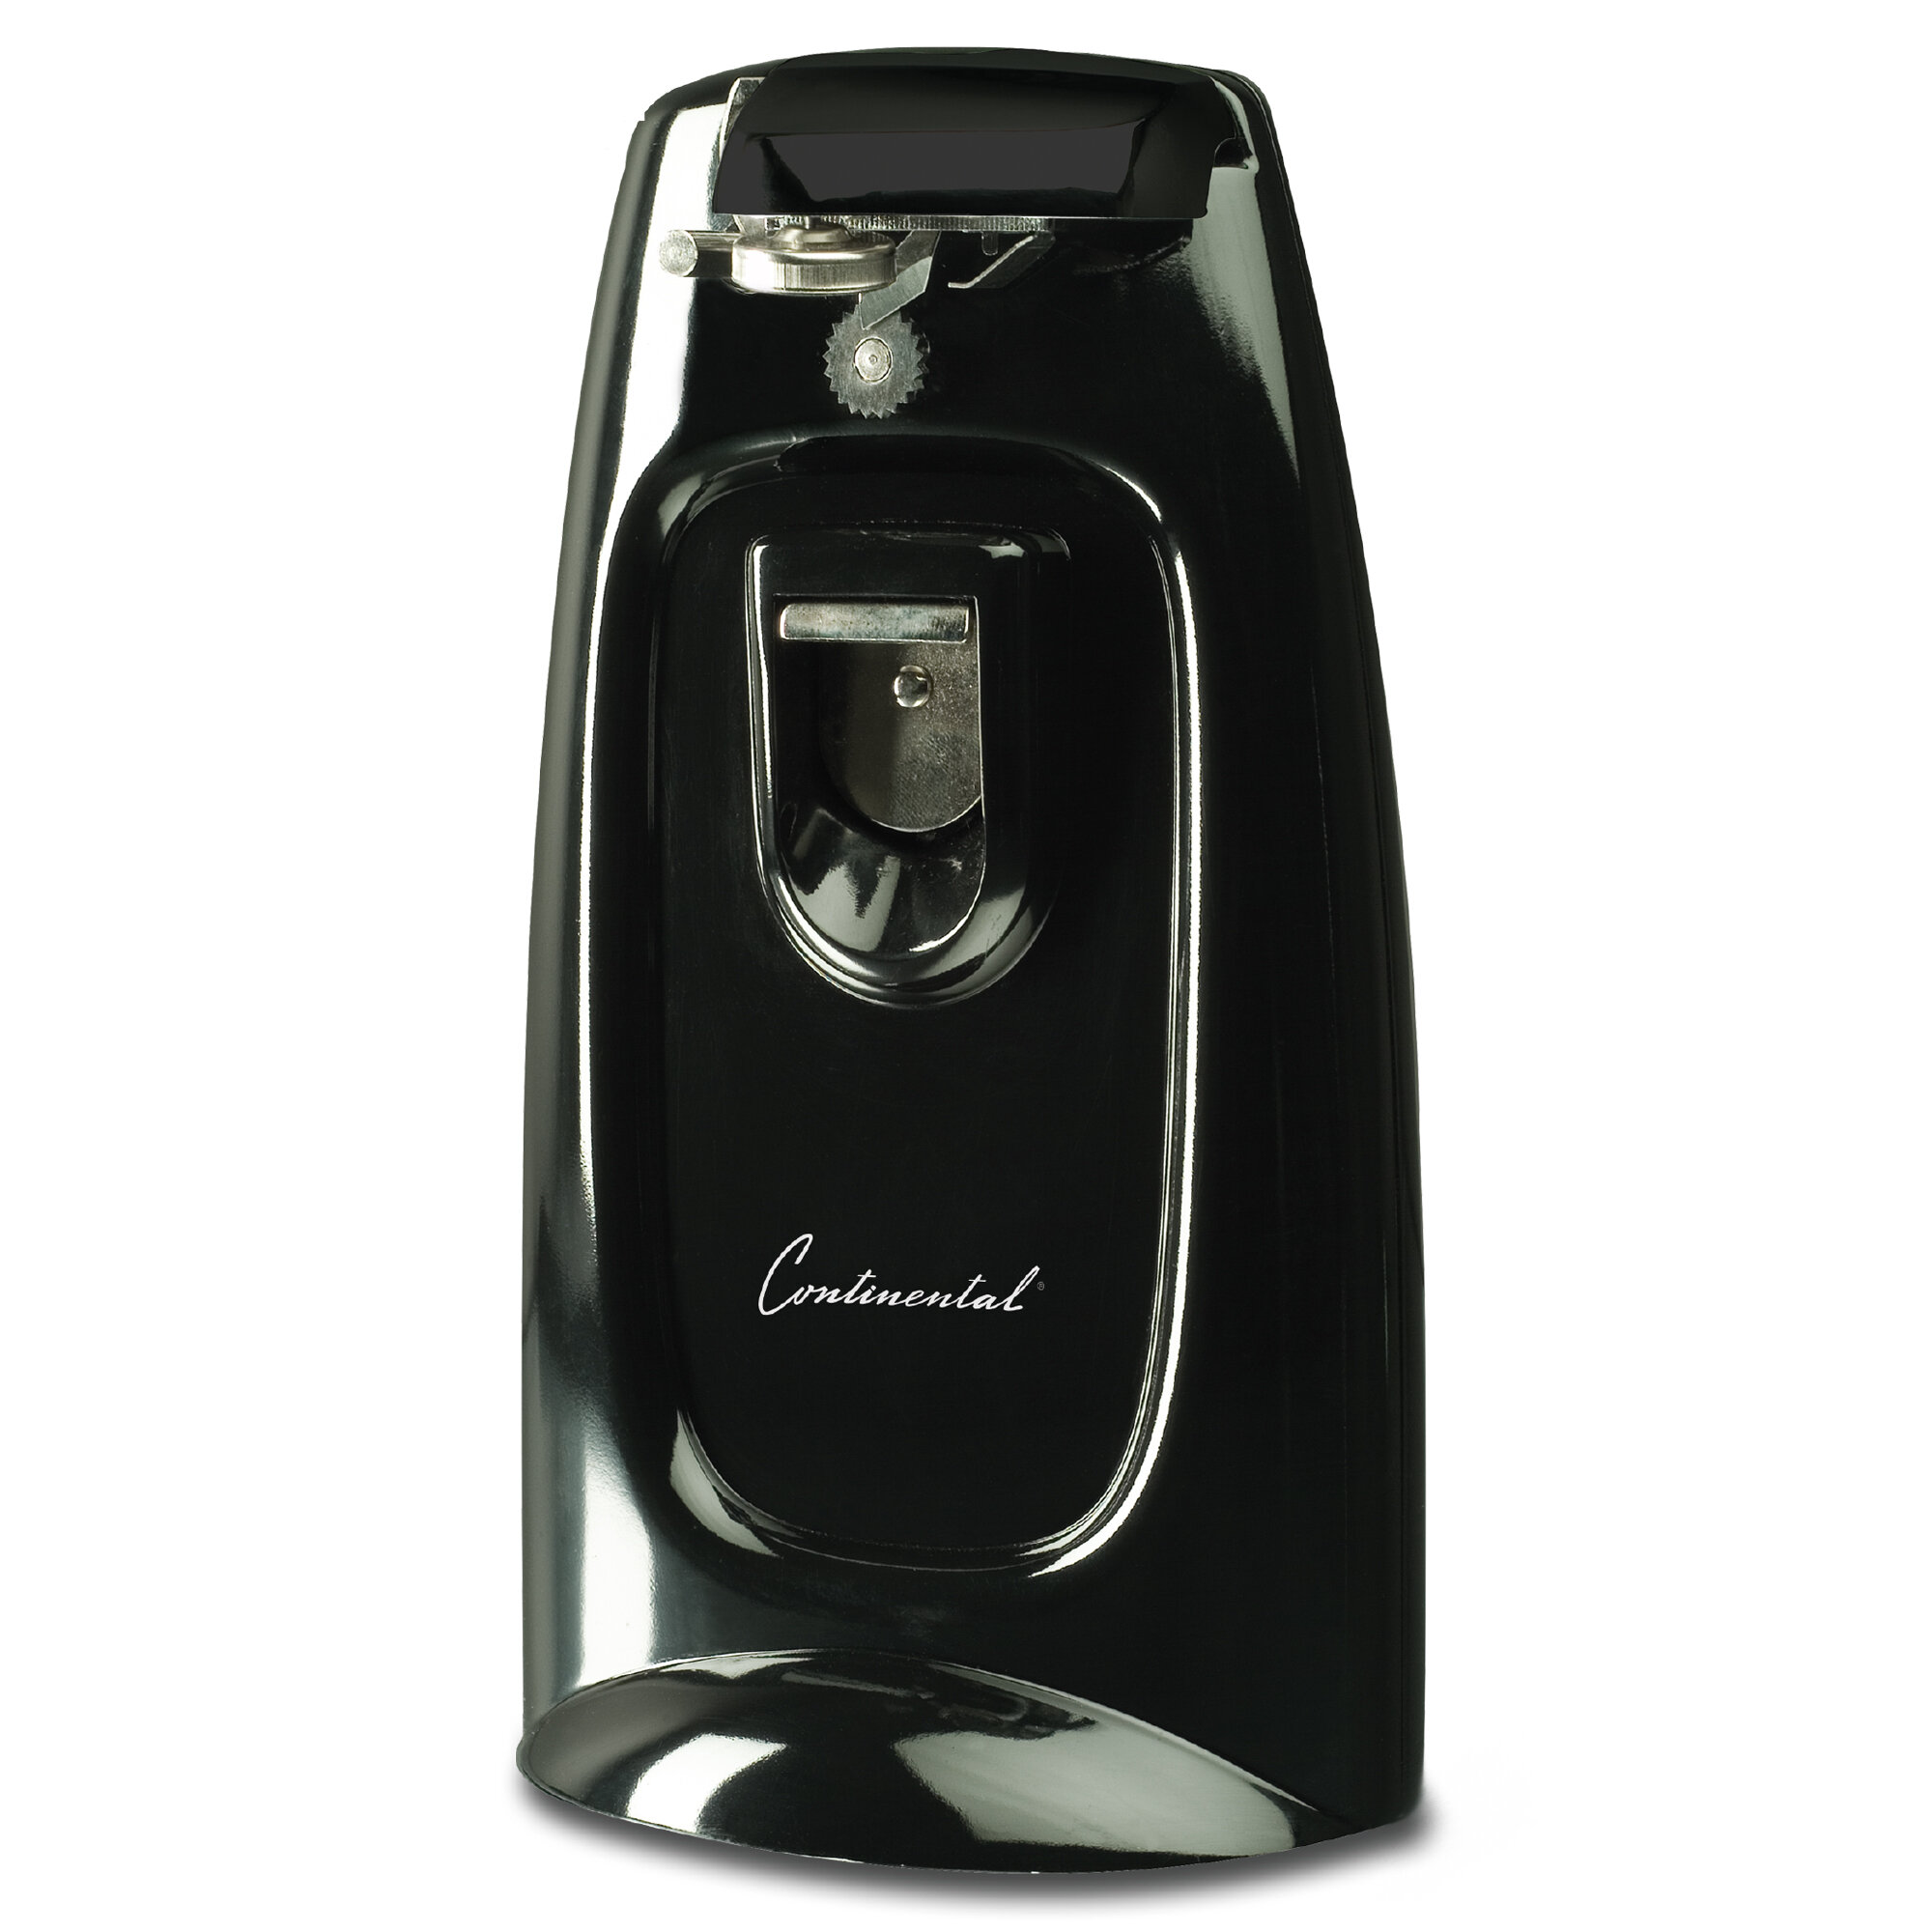 Cuisinart Deluxe Can Opener - appliances - by owner - sale